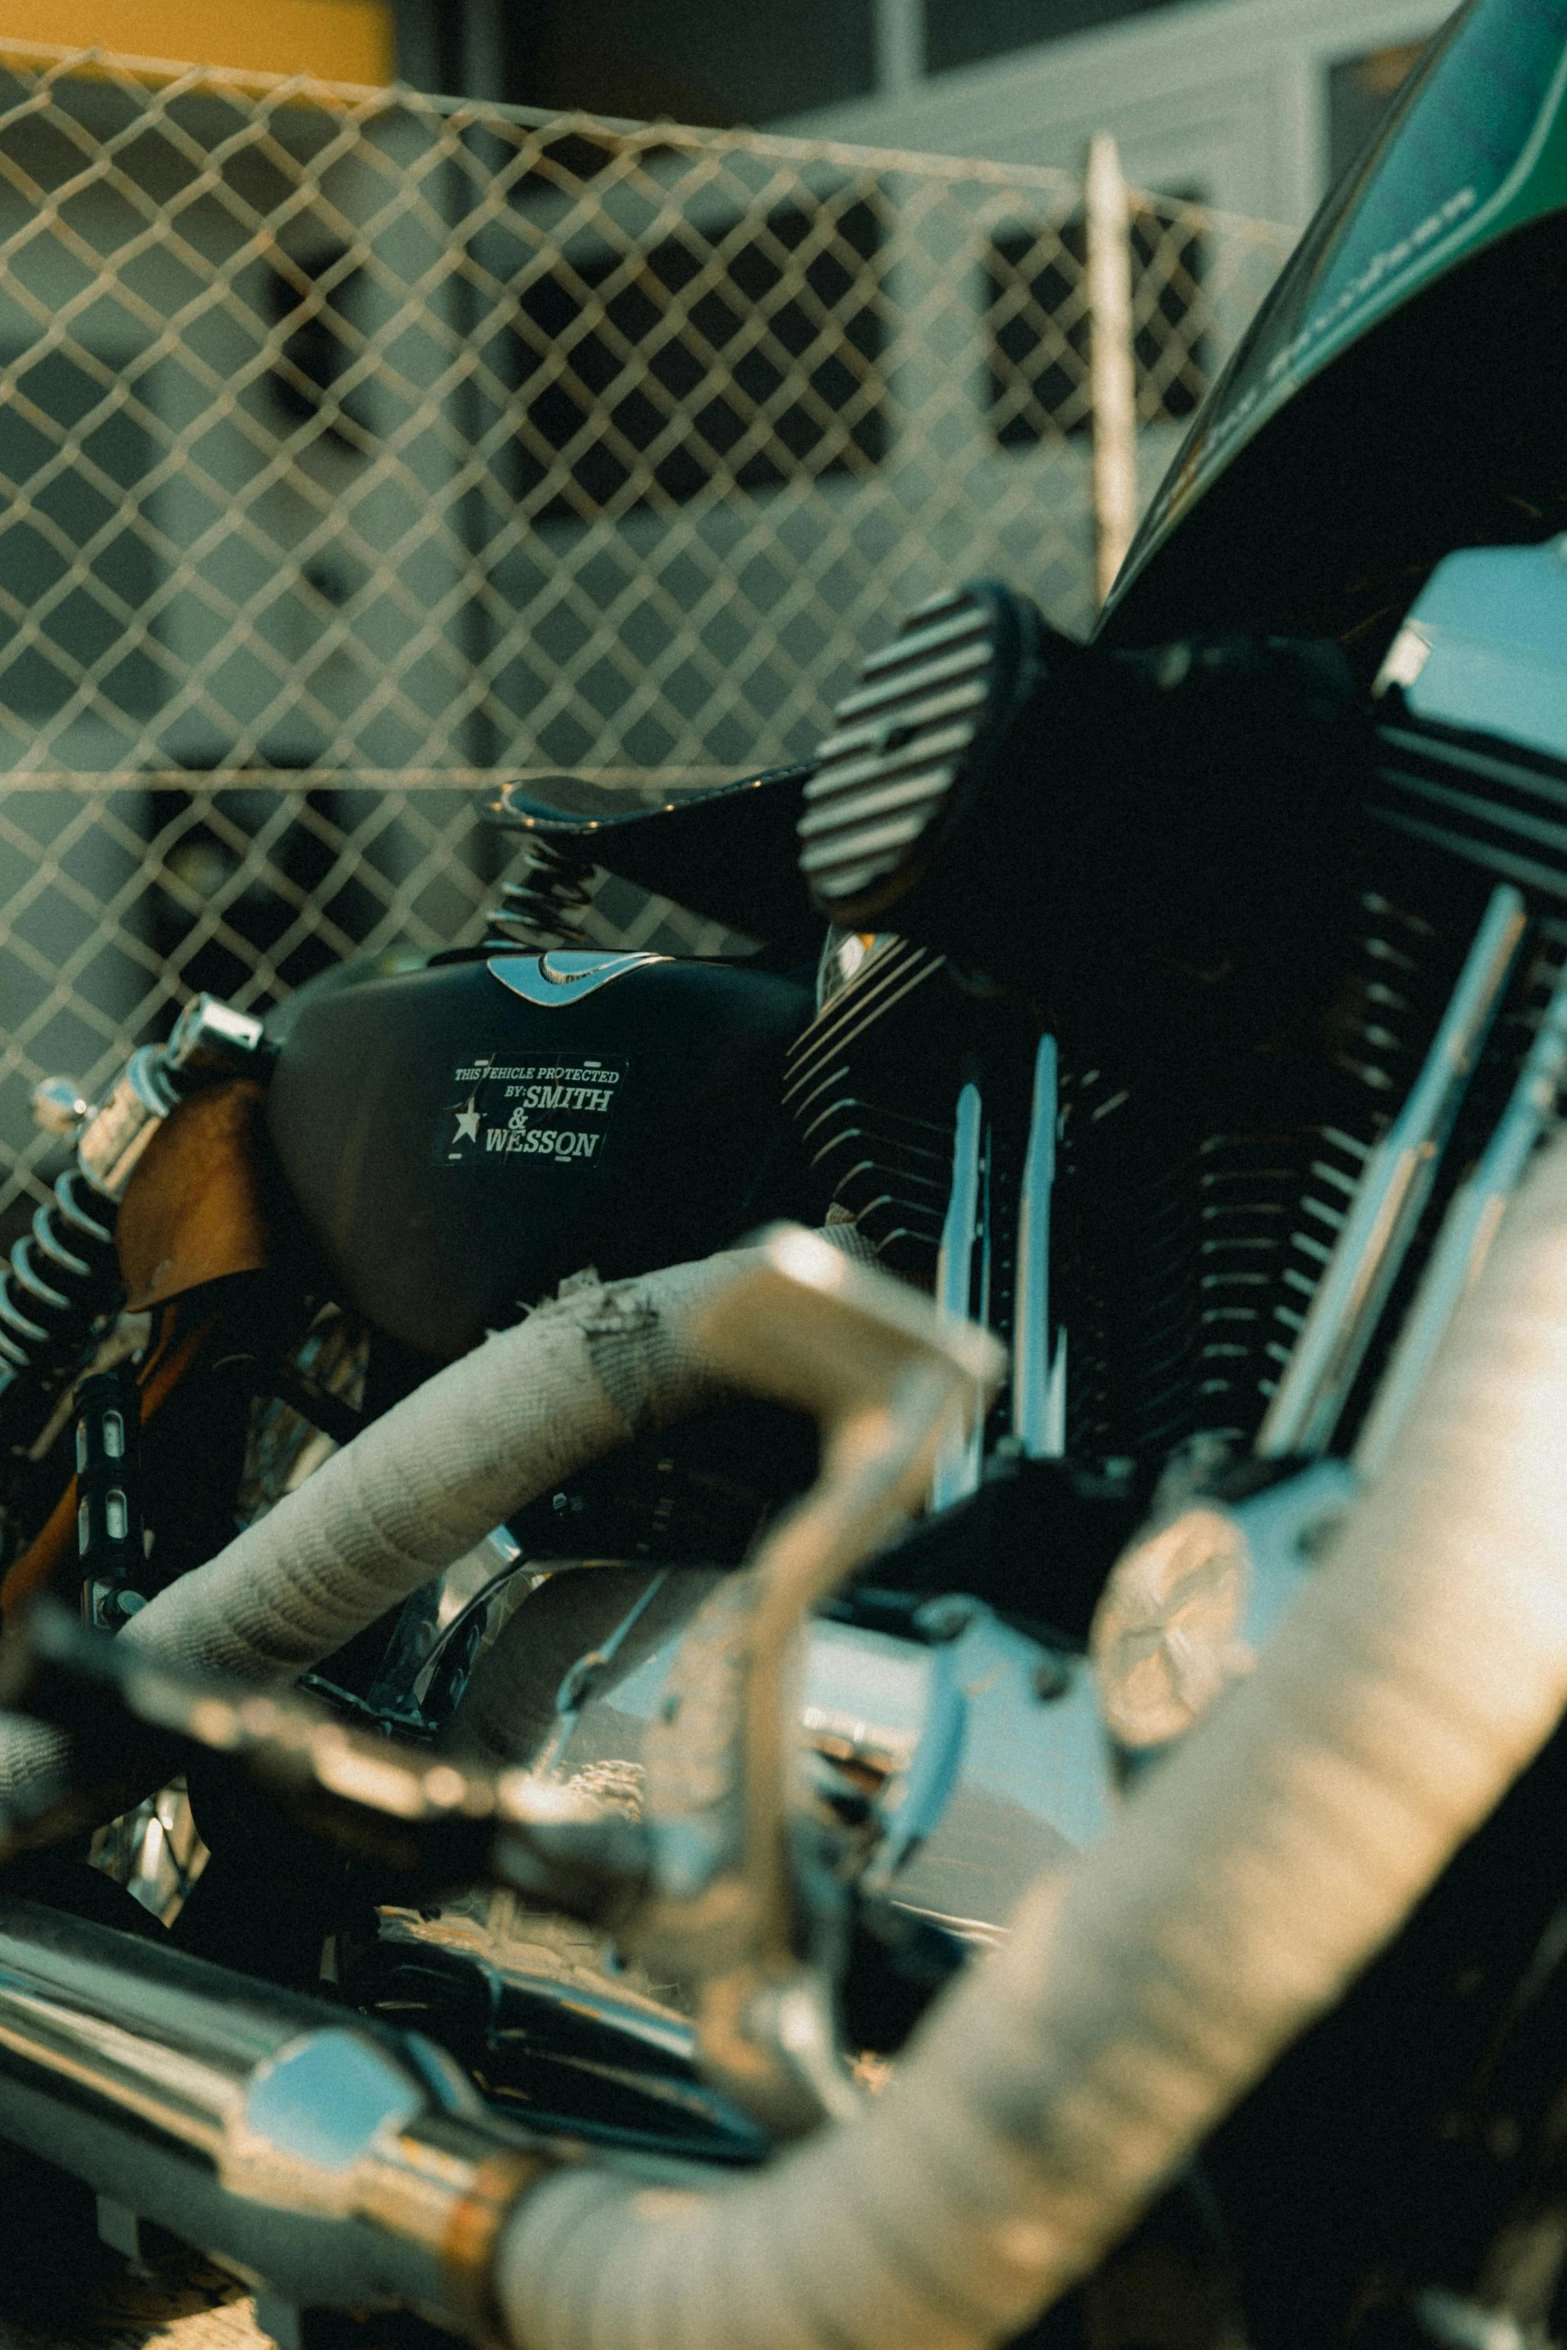 a picture of a black motorcycle parked in a fenced area